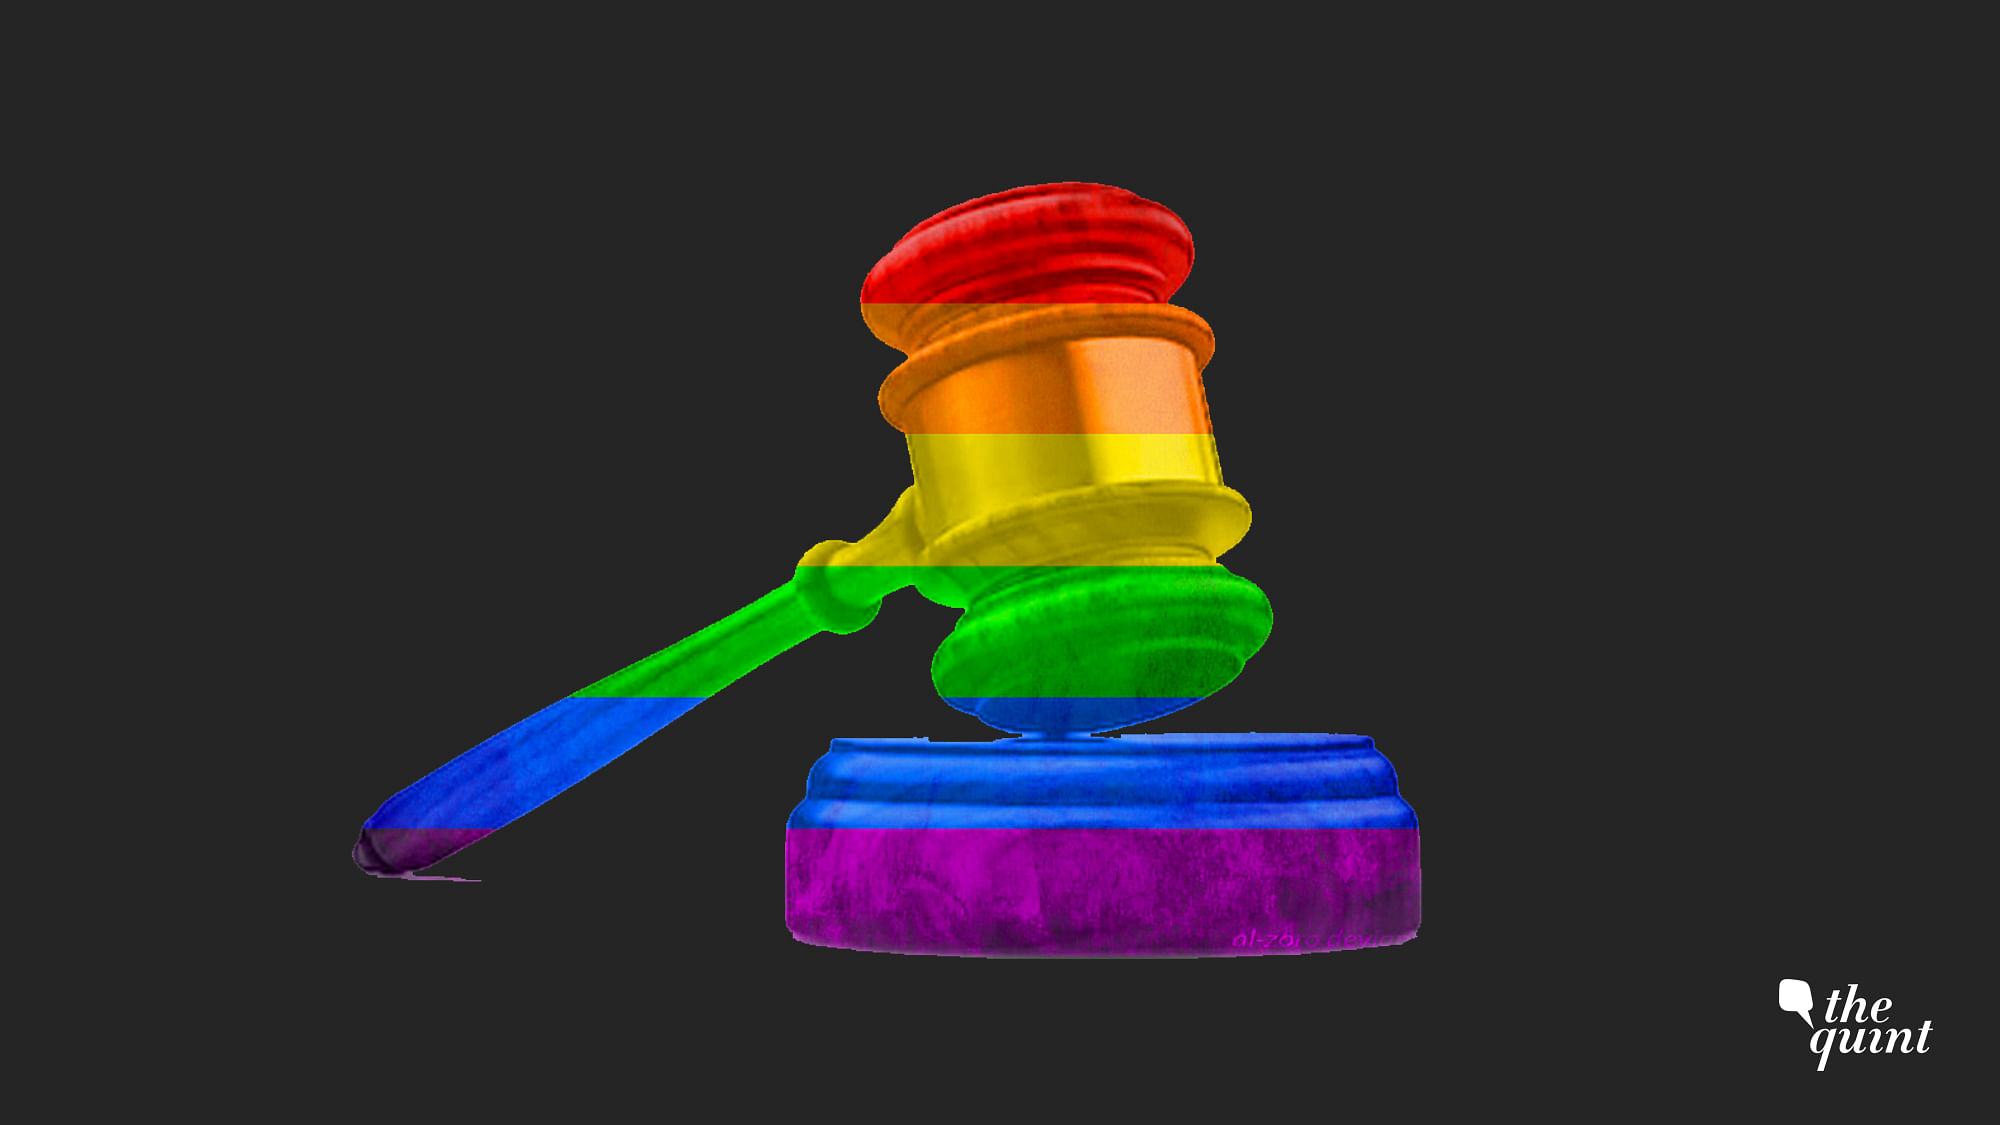 Will the Supreme Court find Section 377 to be unconstitutional?